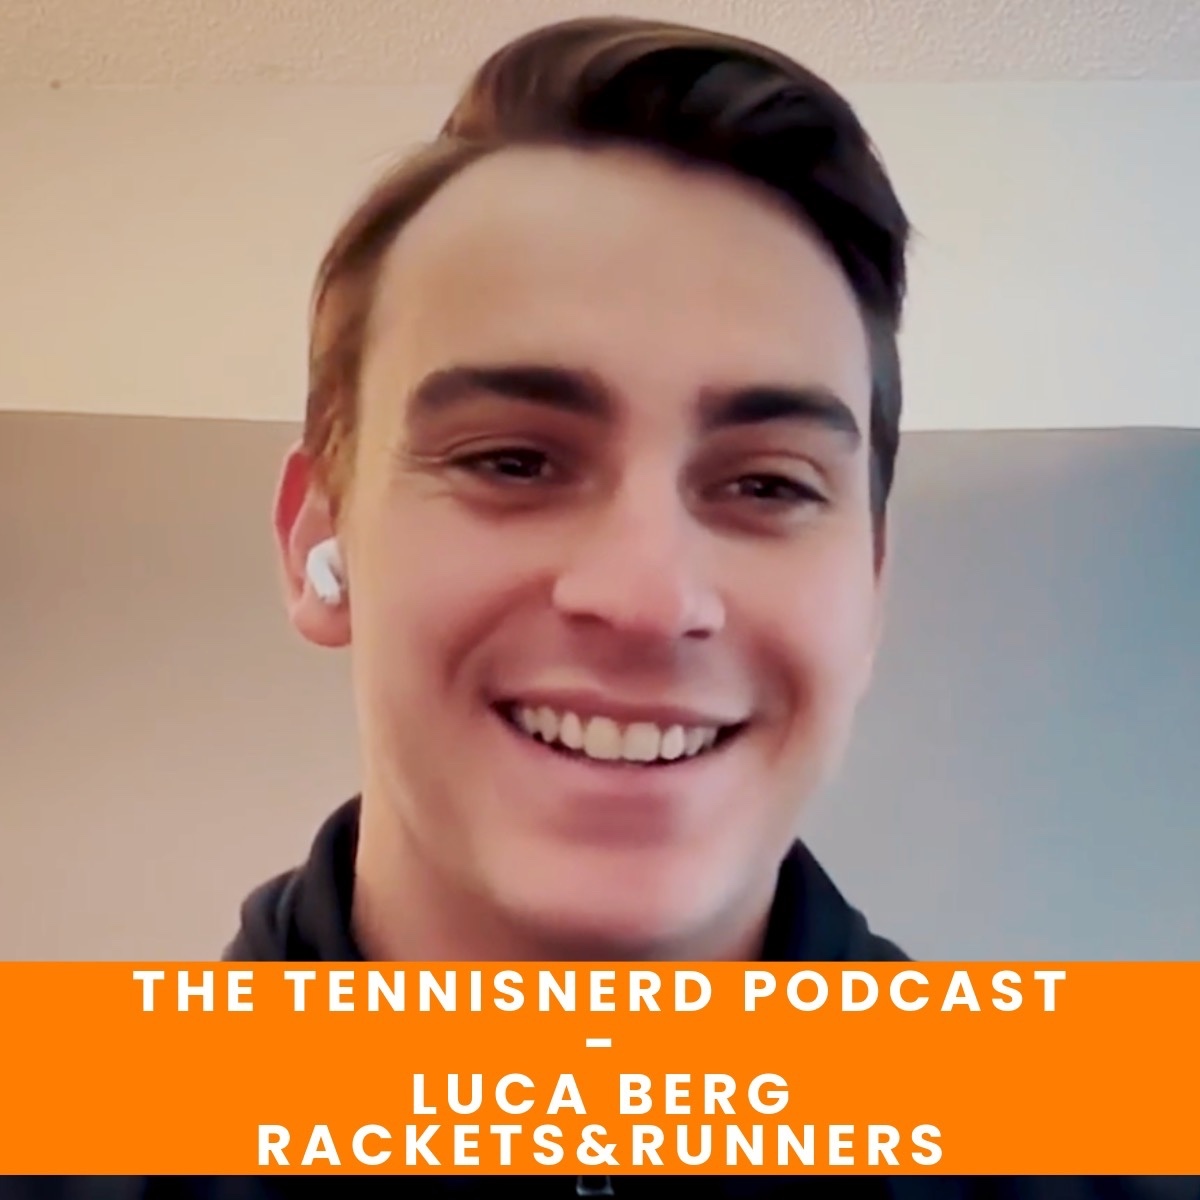 Rackets and runners with Luca Berg